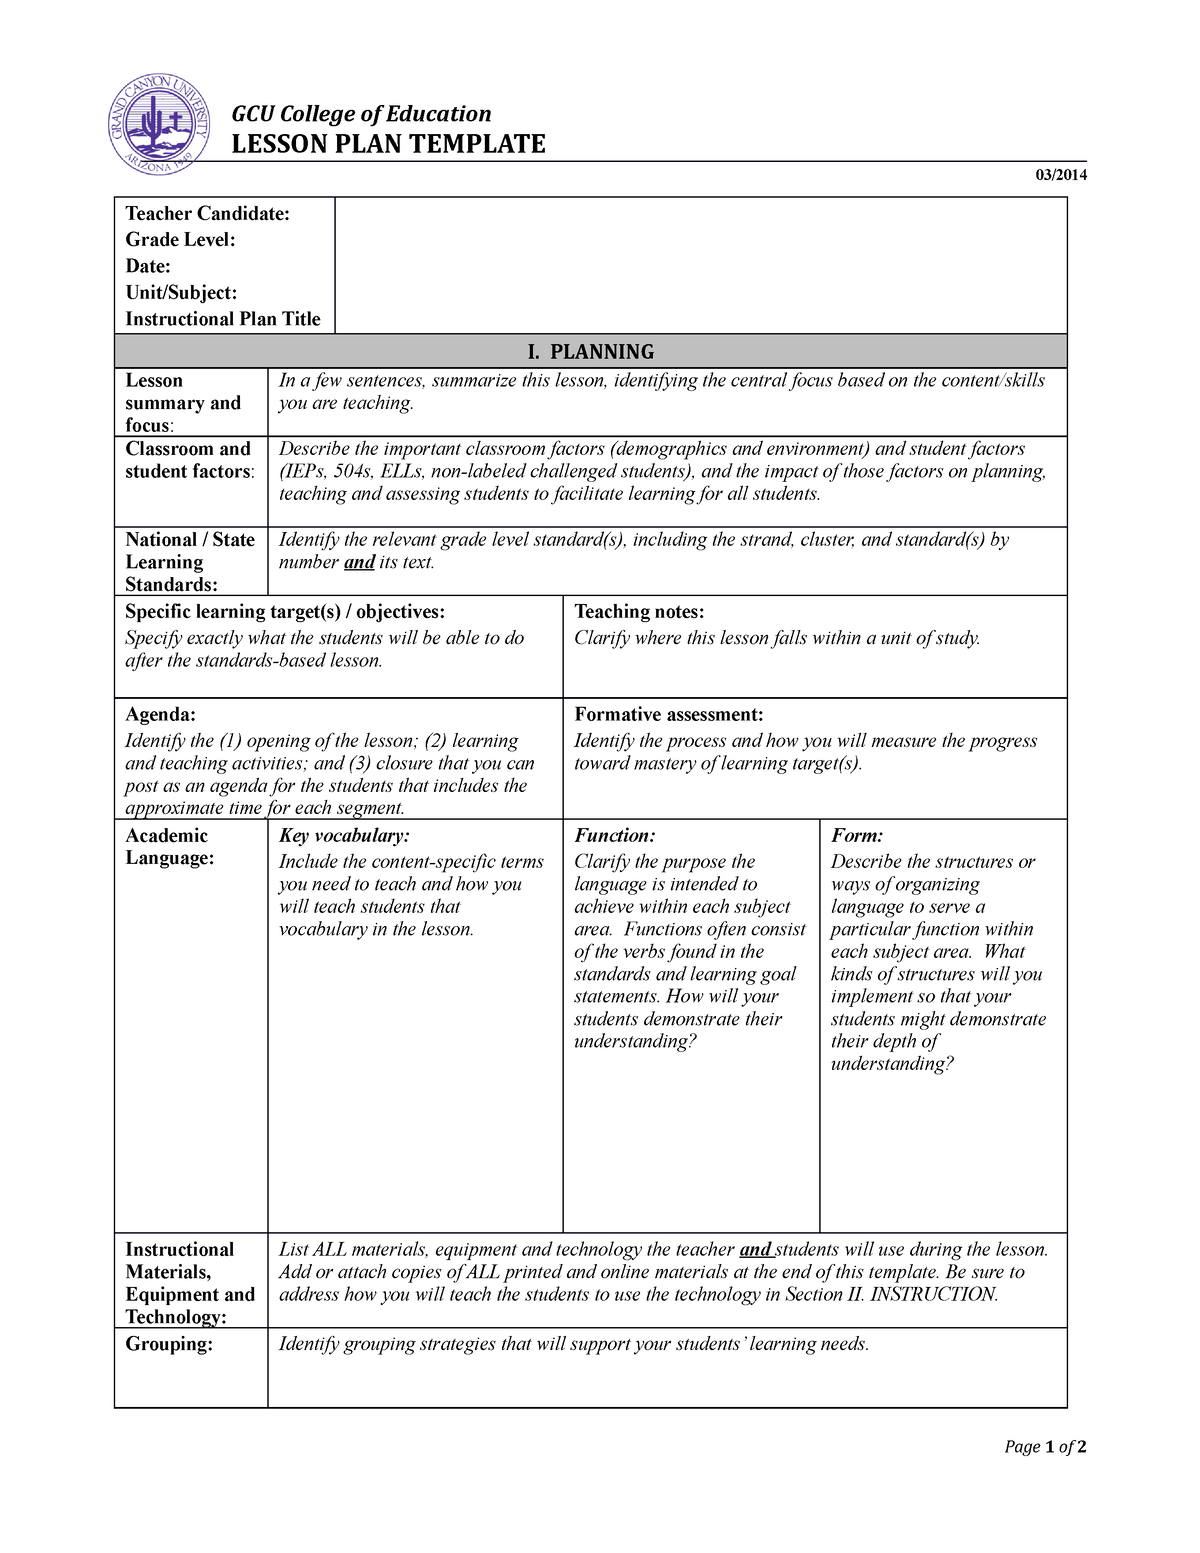 coelesson-plan-paper-gcu-college-of-education-lesson-plan-template-03-teacher-candidate